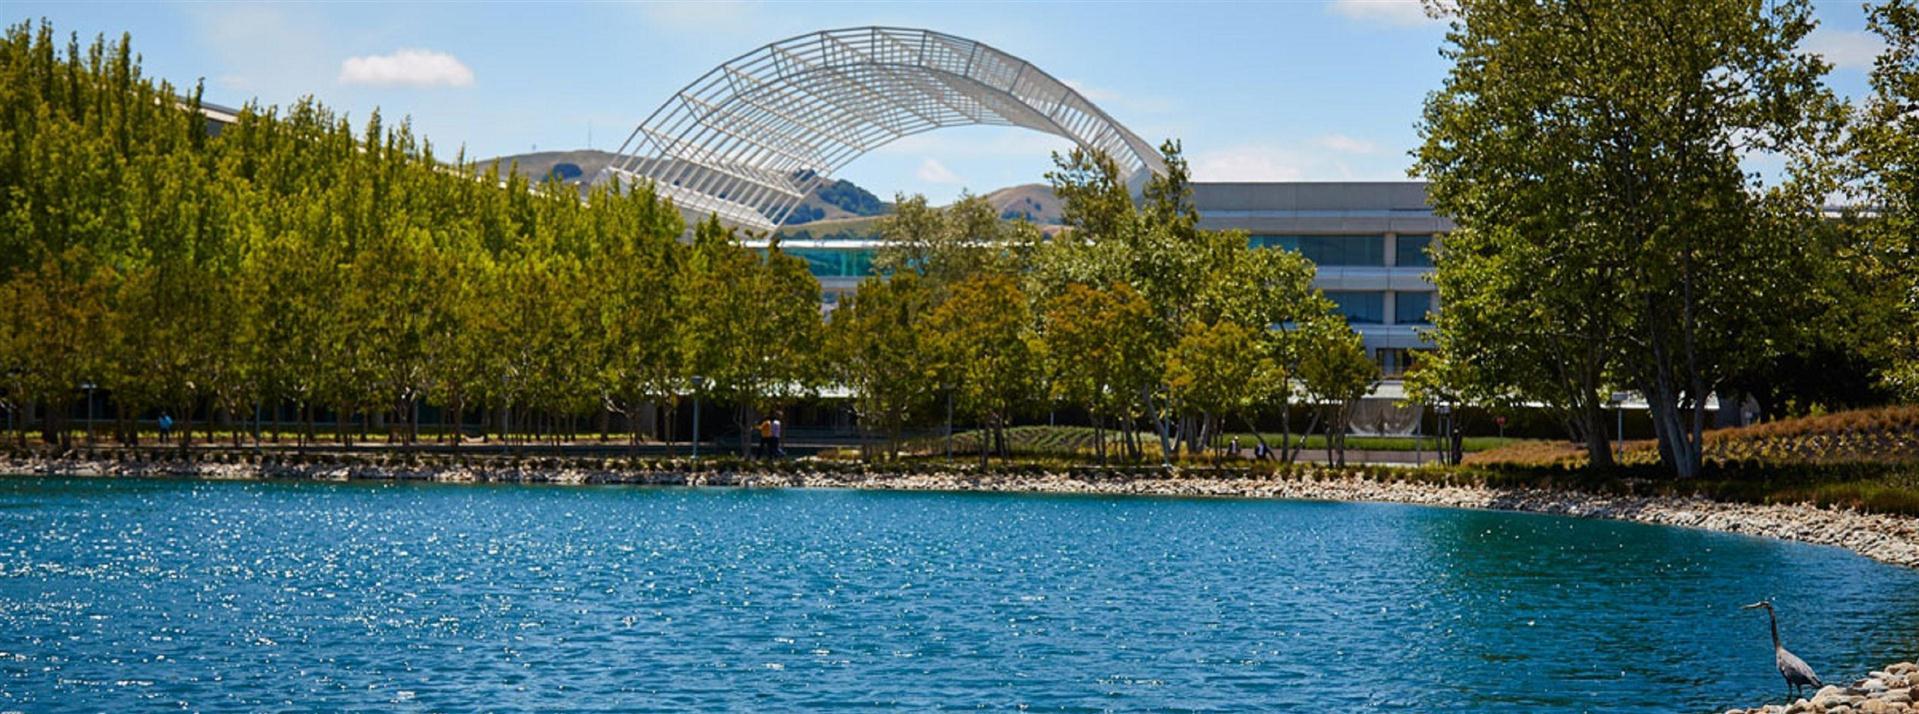 Roundhouse Market & Conference Center in San Ramon, CA